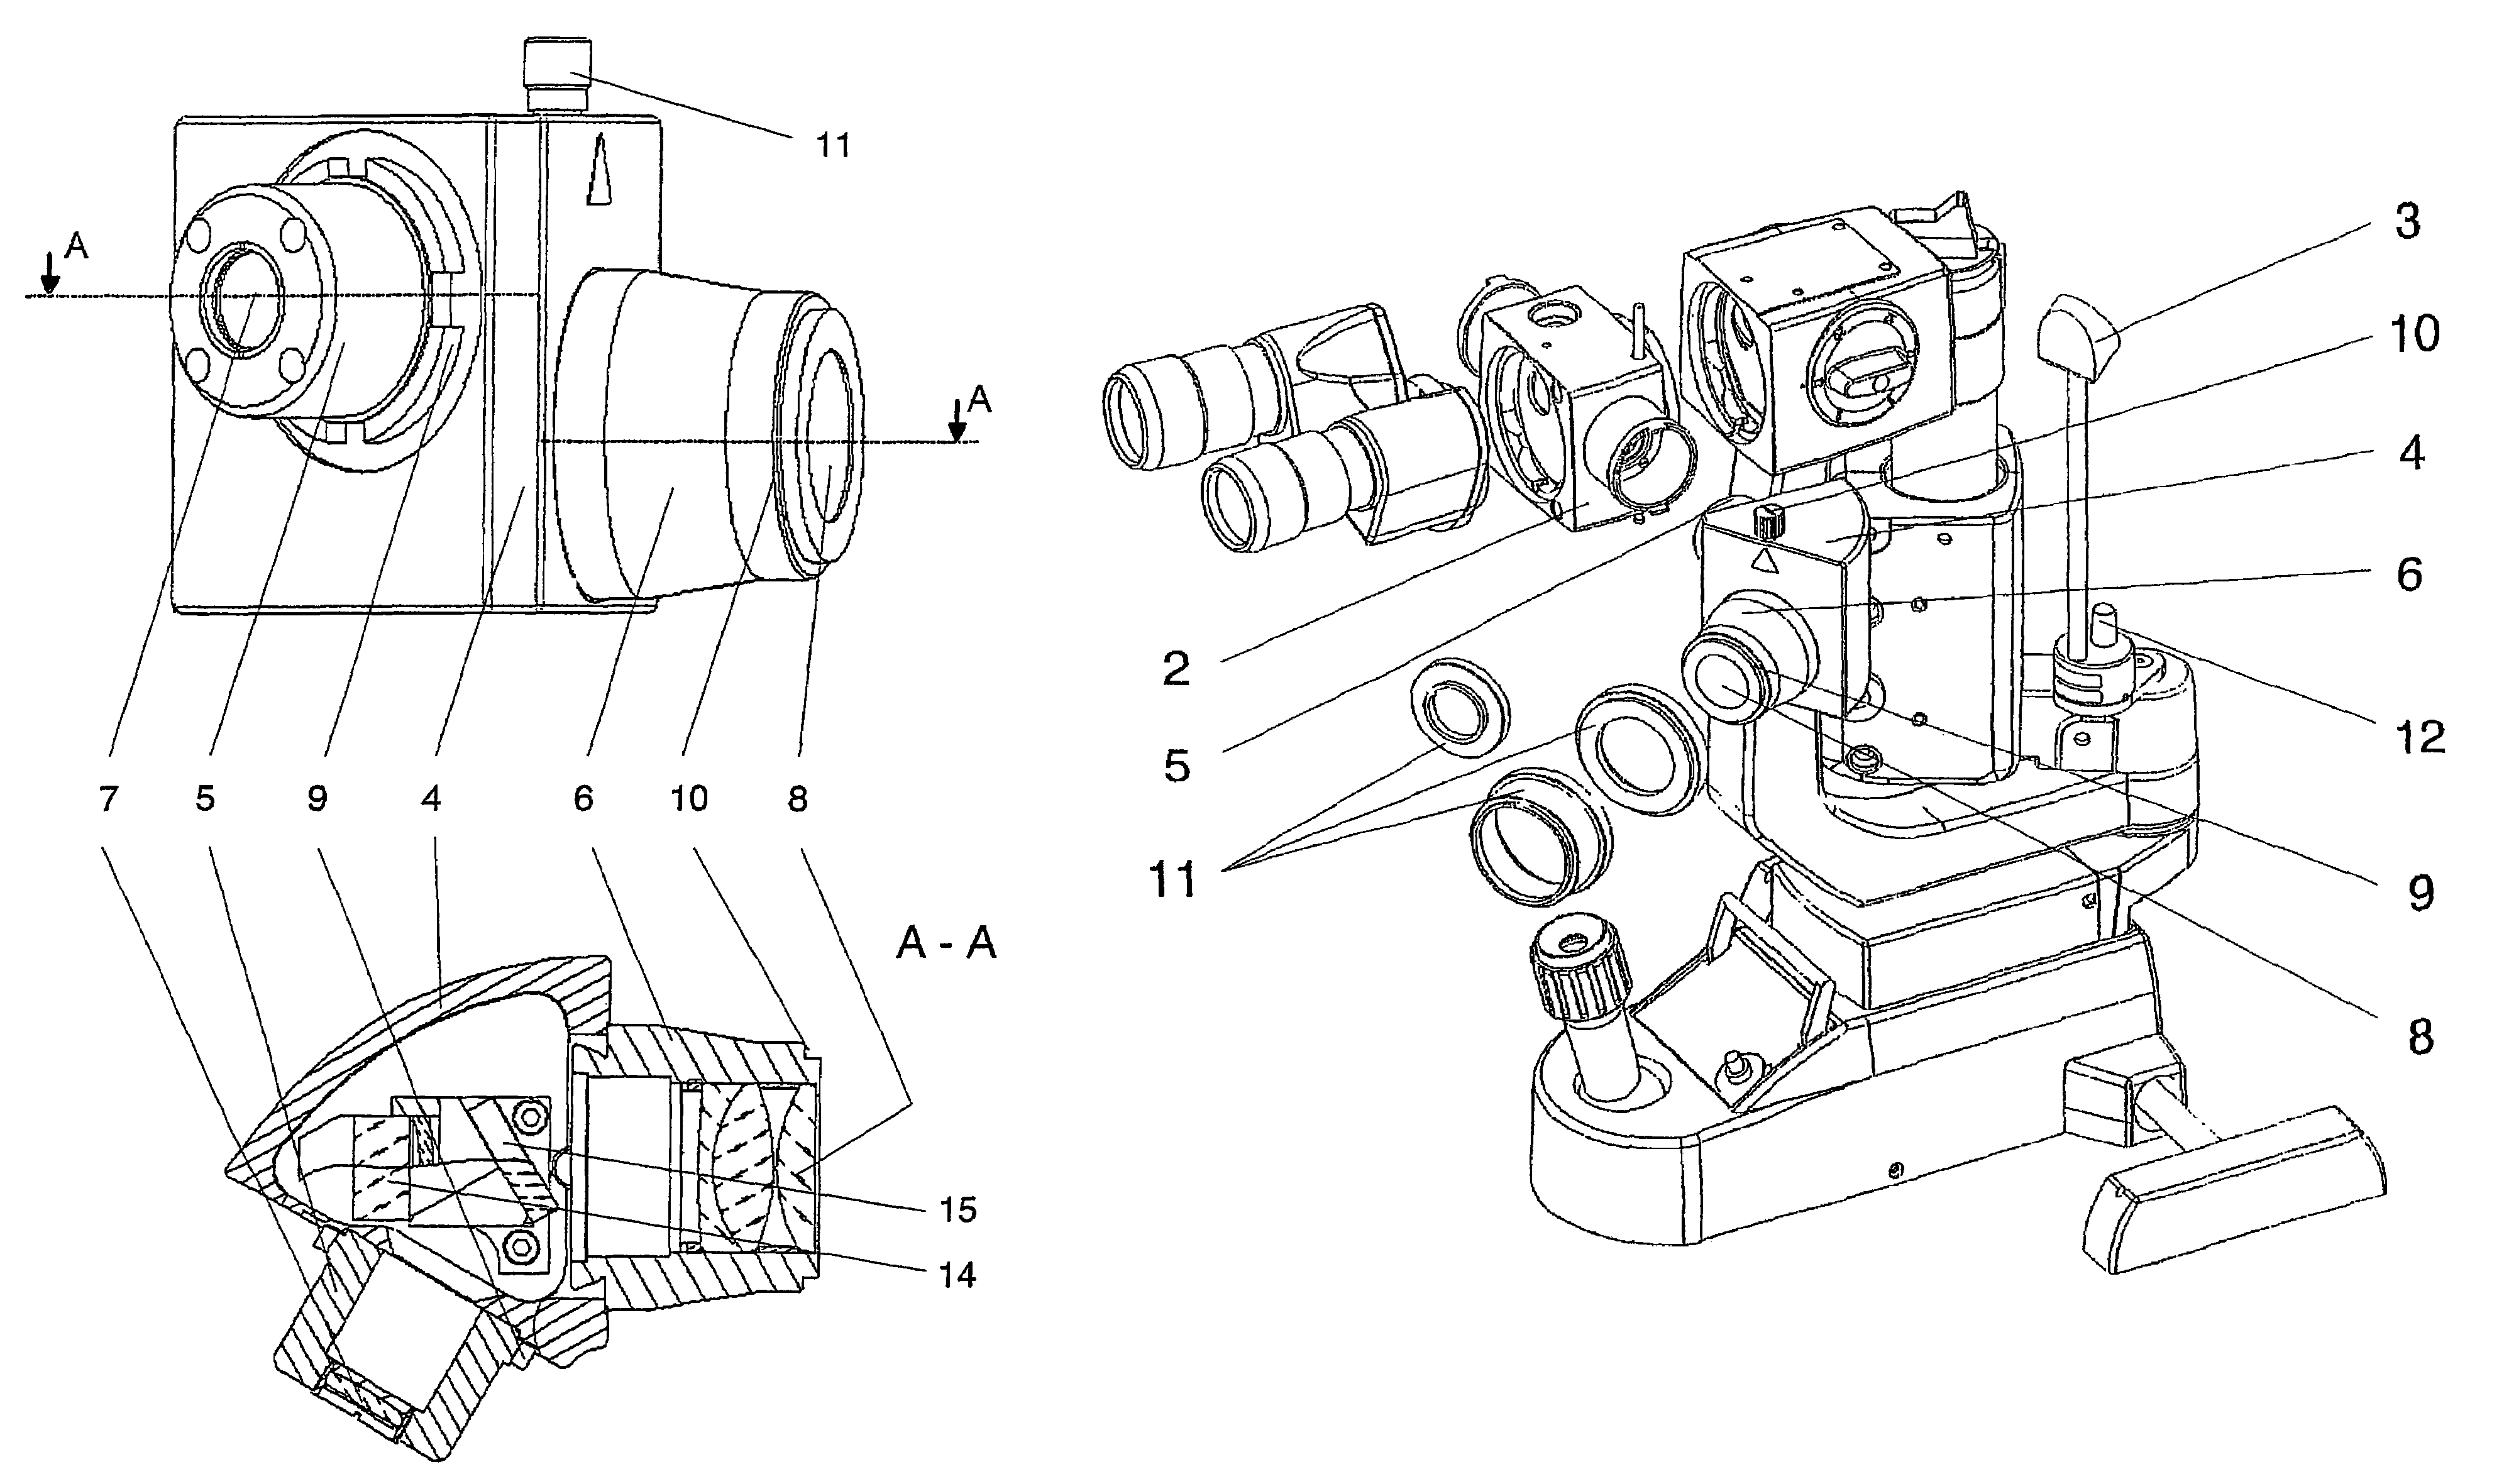 Camera adapter for optical devices, in particular microscopes